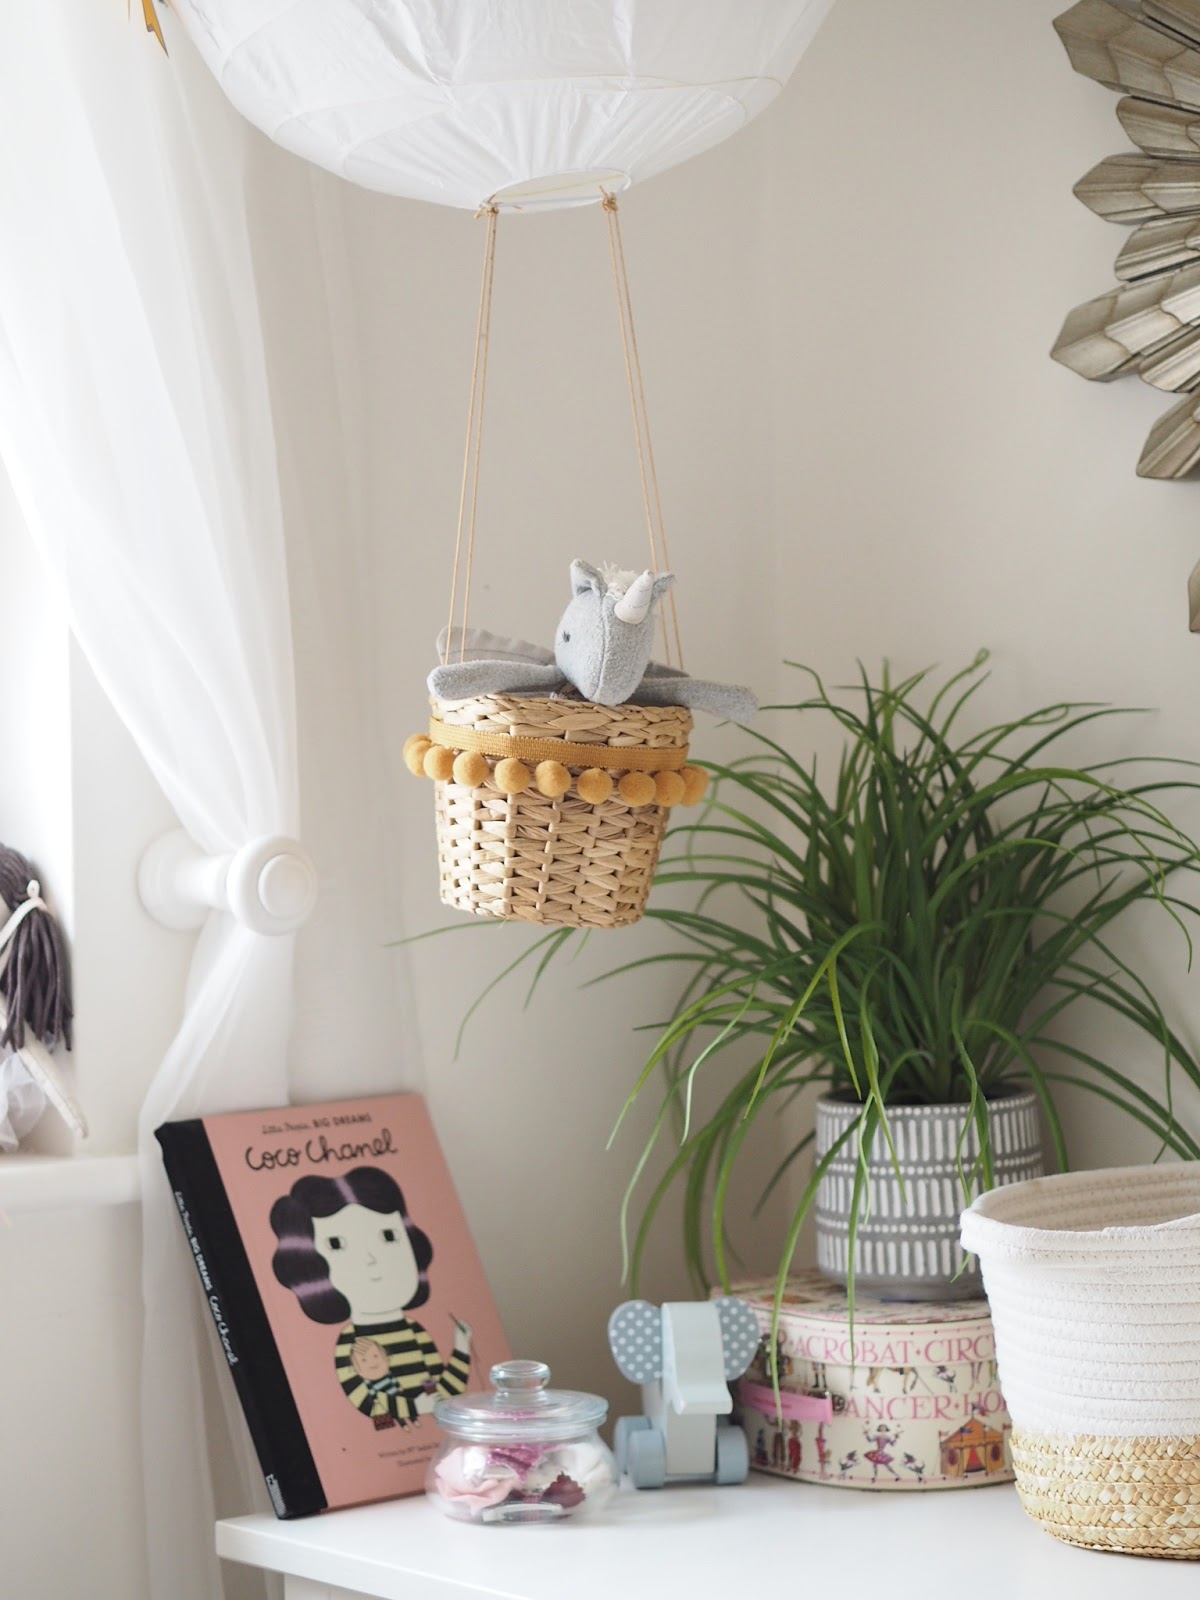 DIY hot air balloon nursery decoration from an IKEA Regolit light shade. Childrens bedroom decor on a budget. Easy DIY craft project you can complete in a couple of hours.